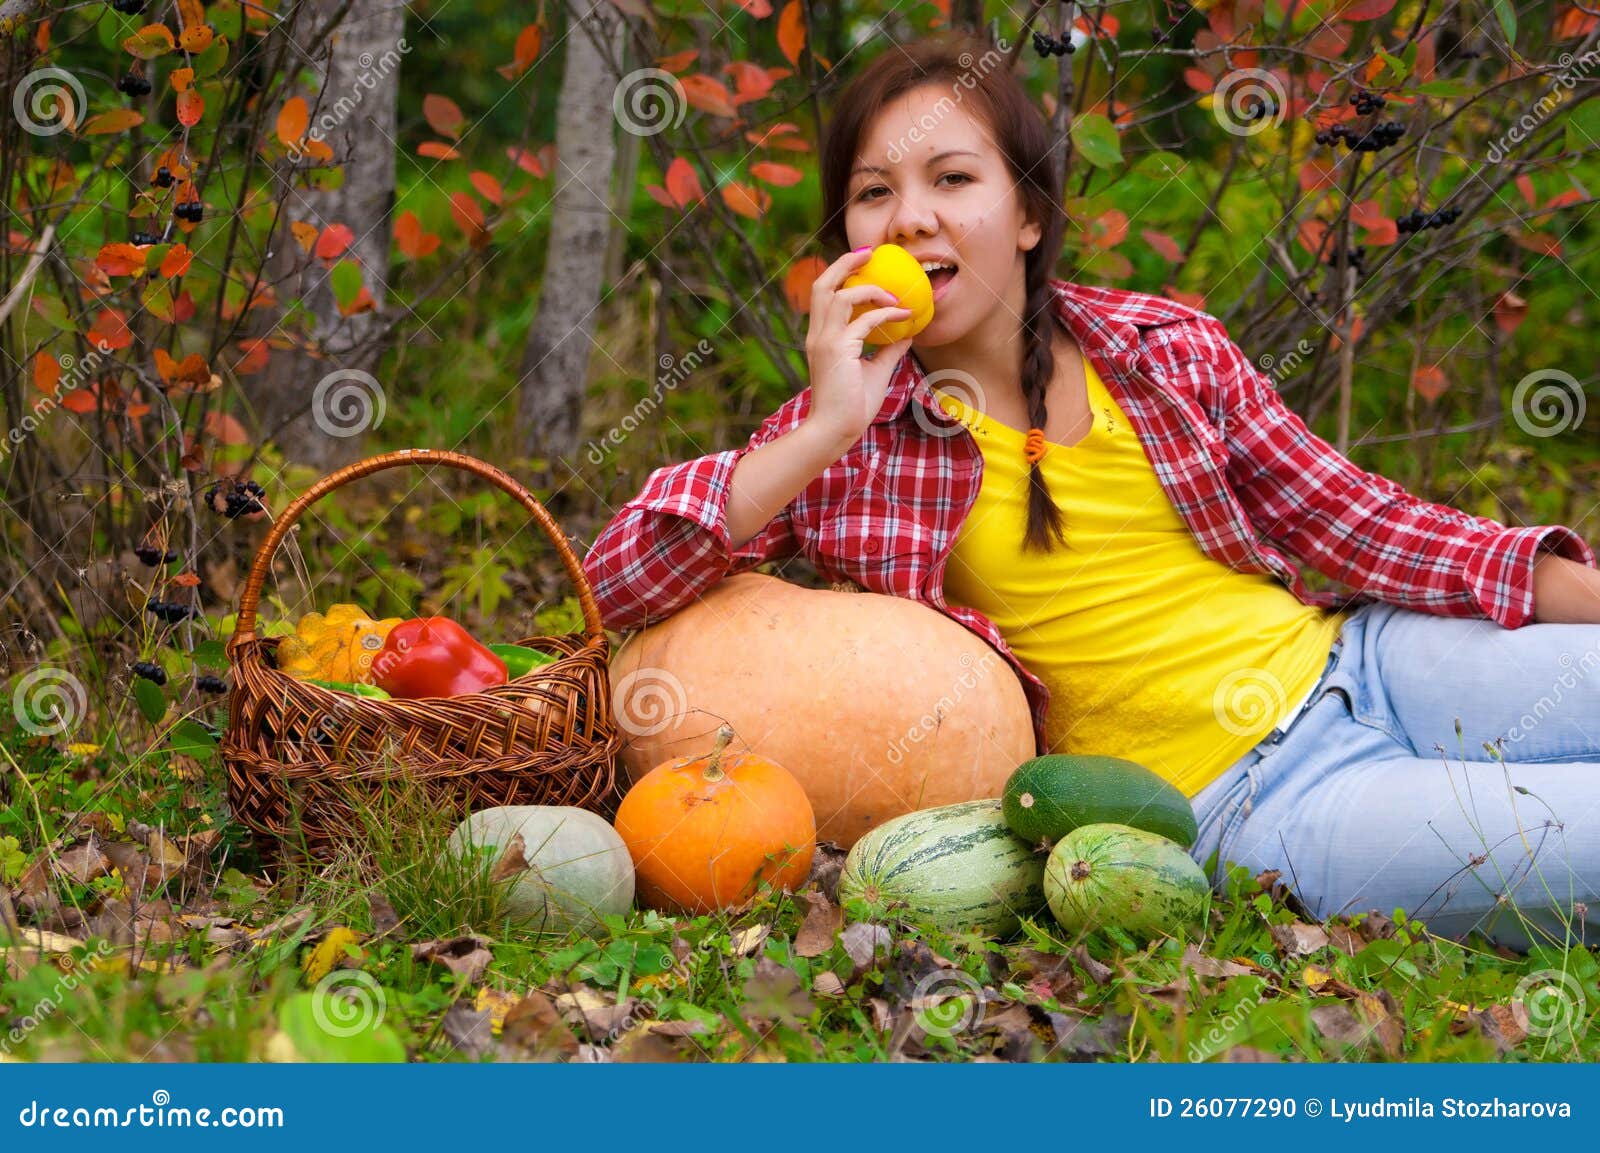 Girl with vegetables stock photo. Image of outdoors, orange - 26077290